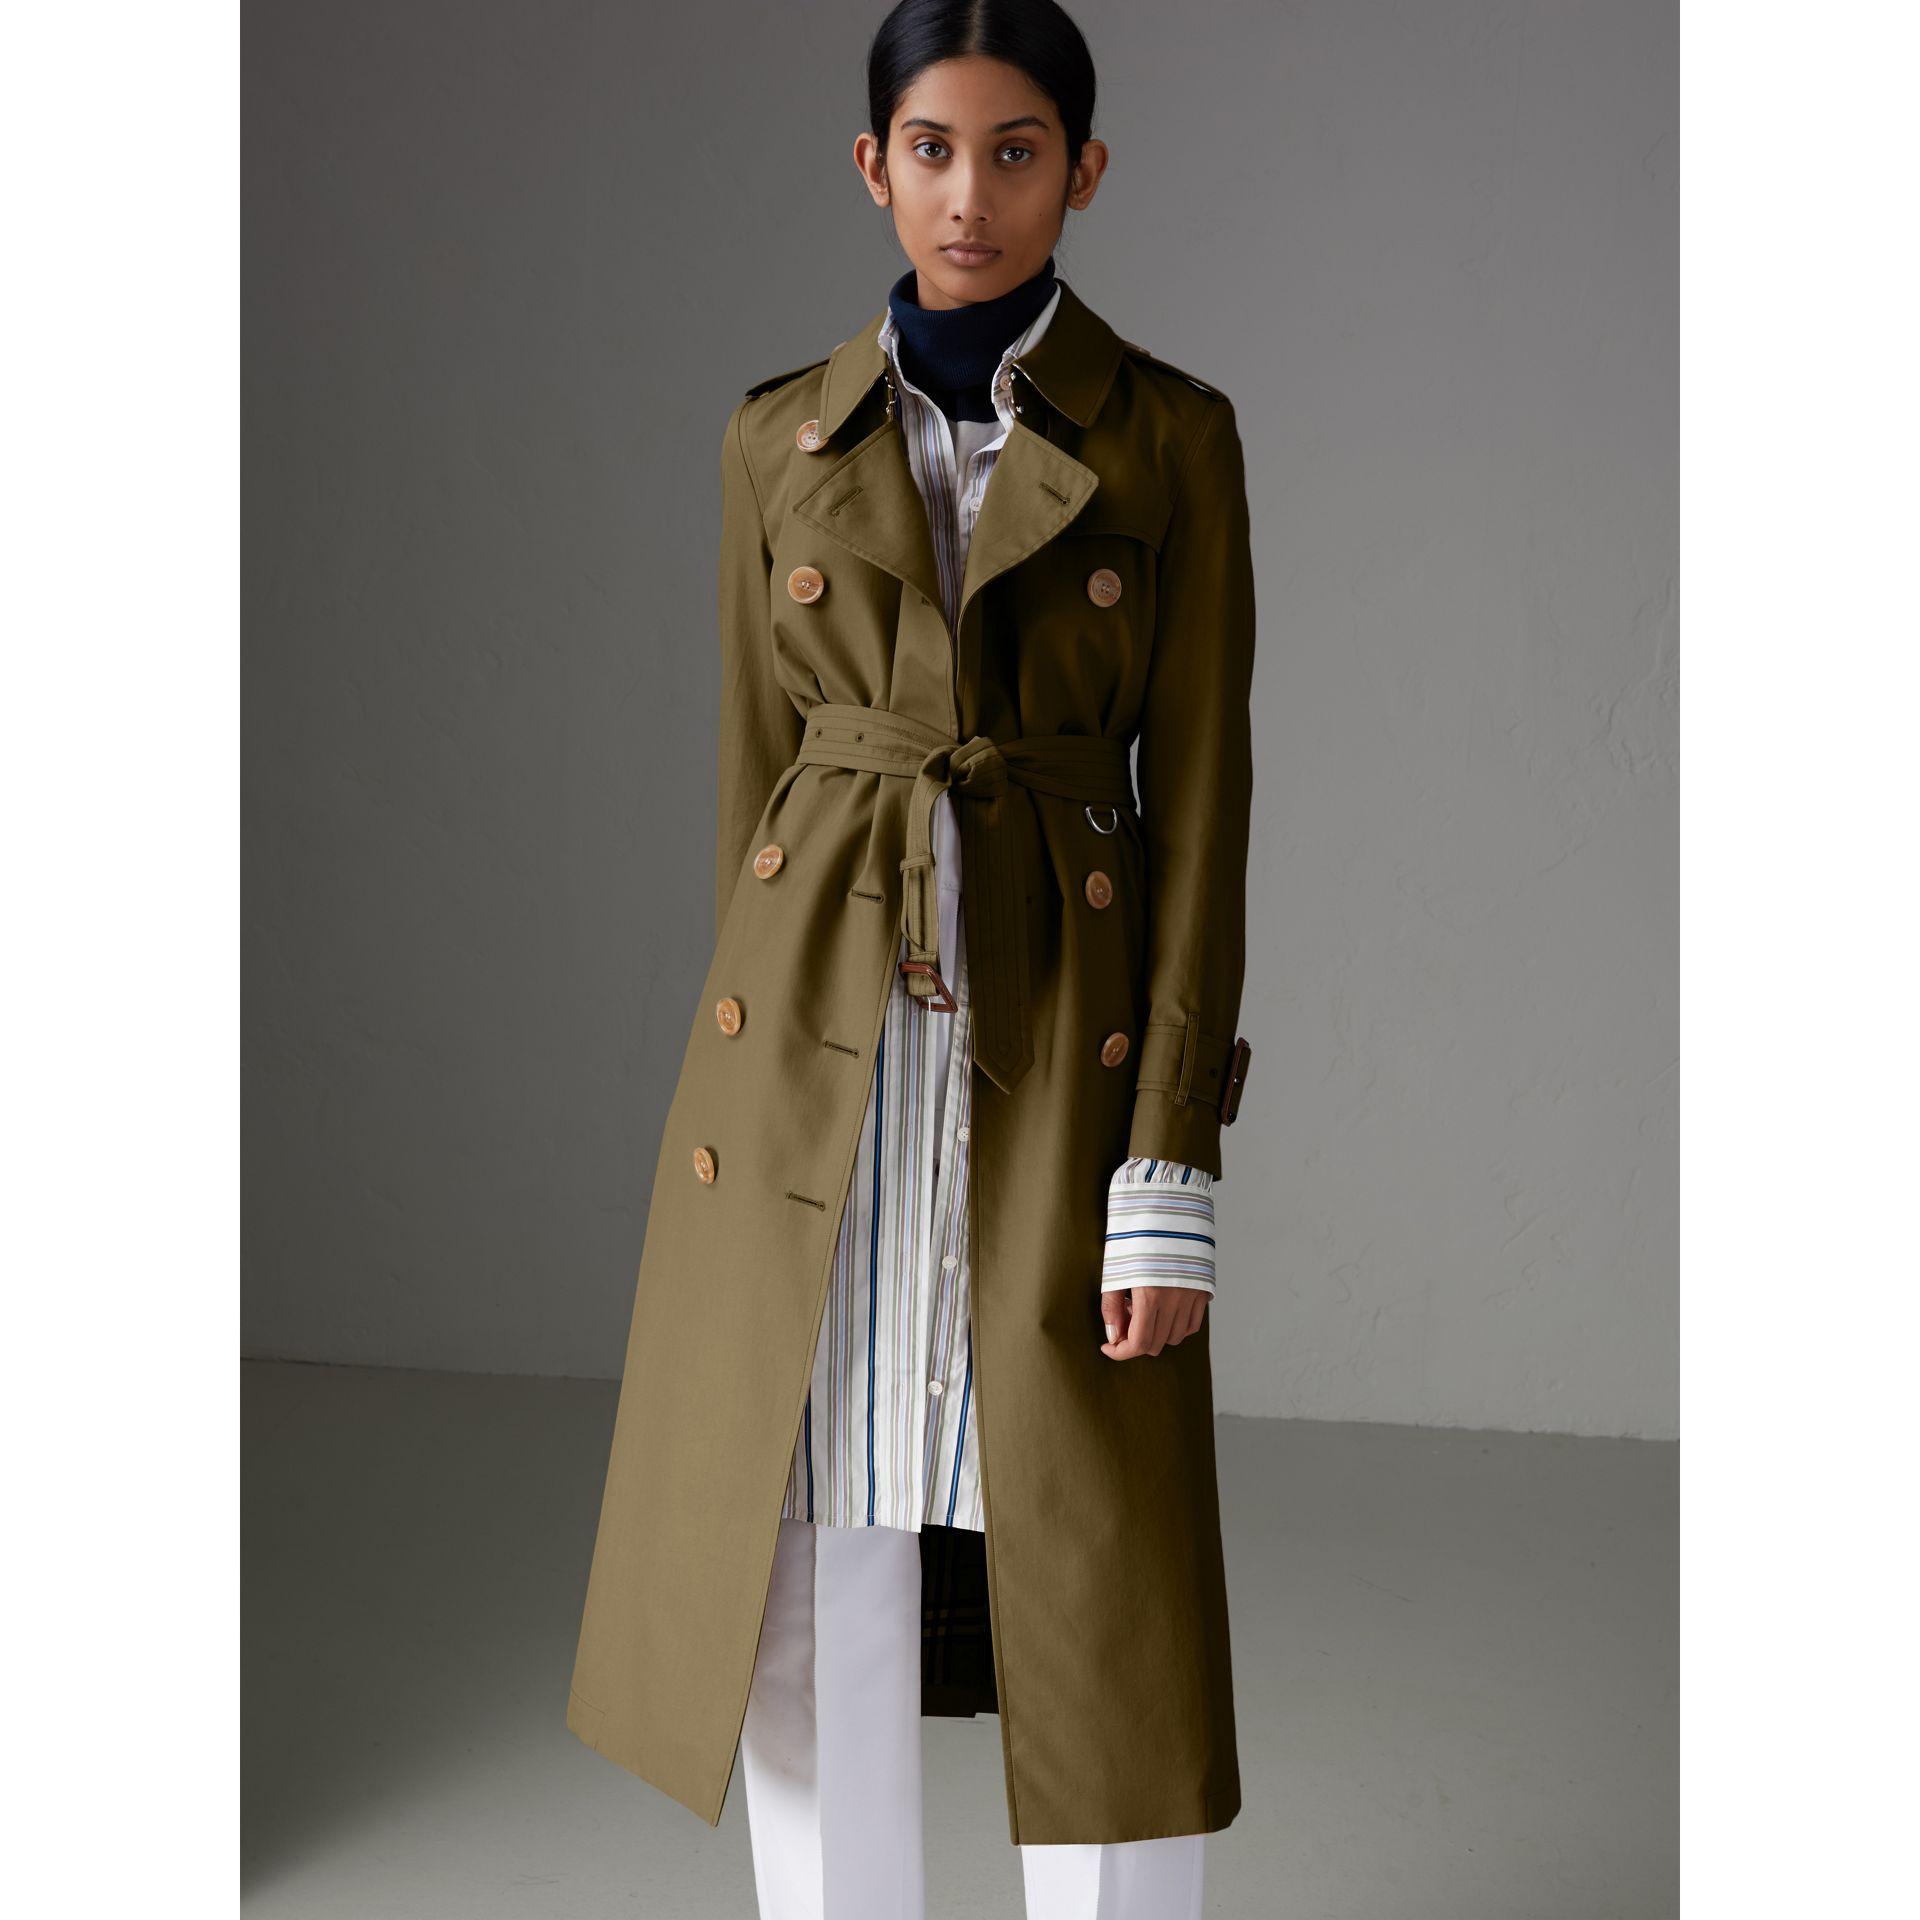 burberry green trench coat